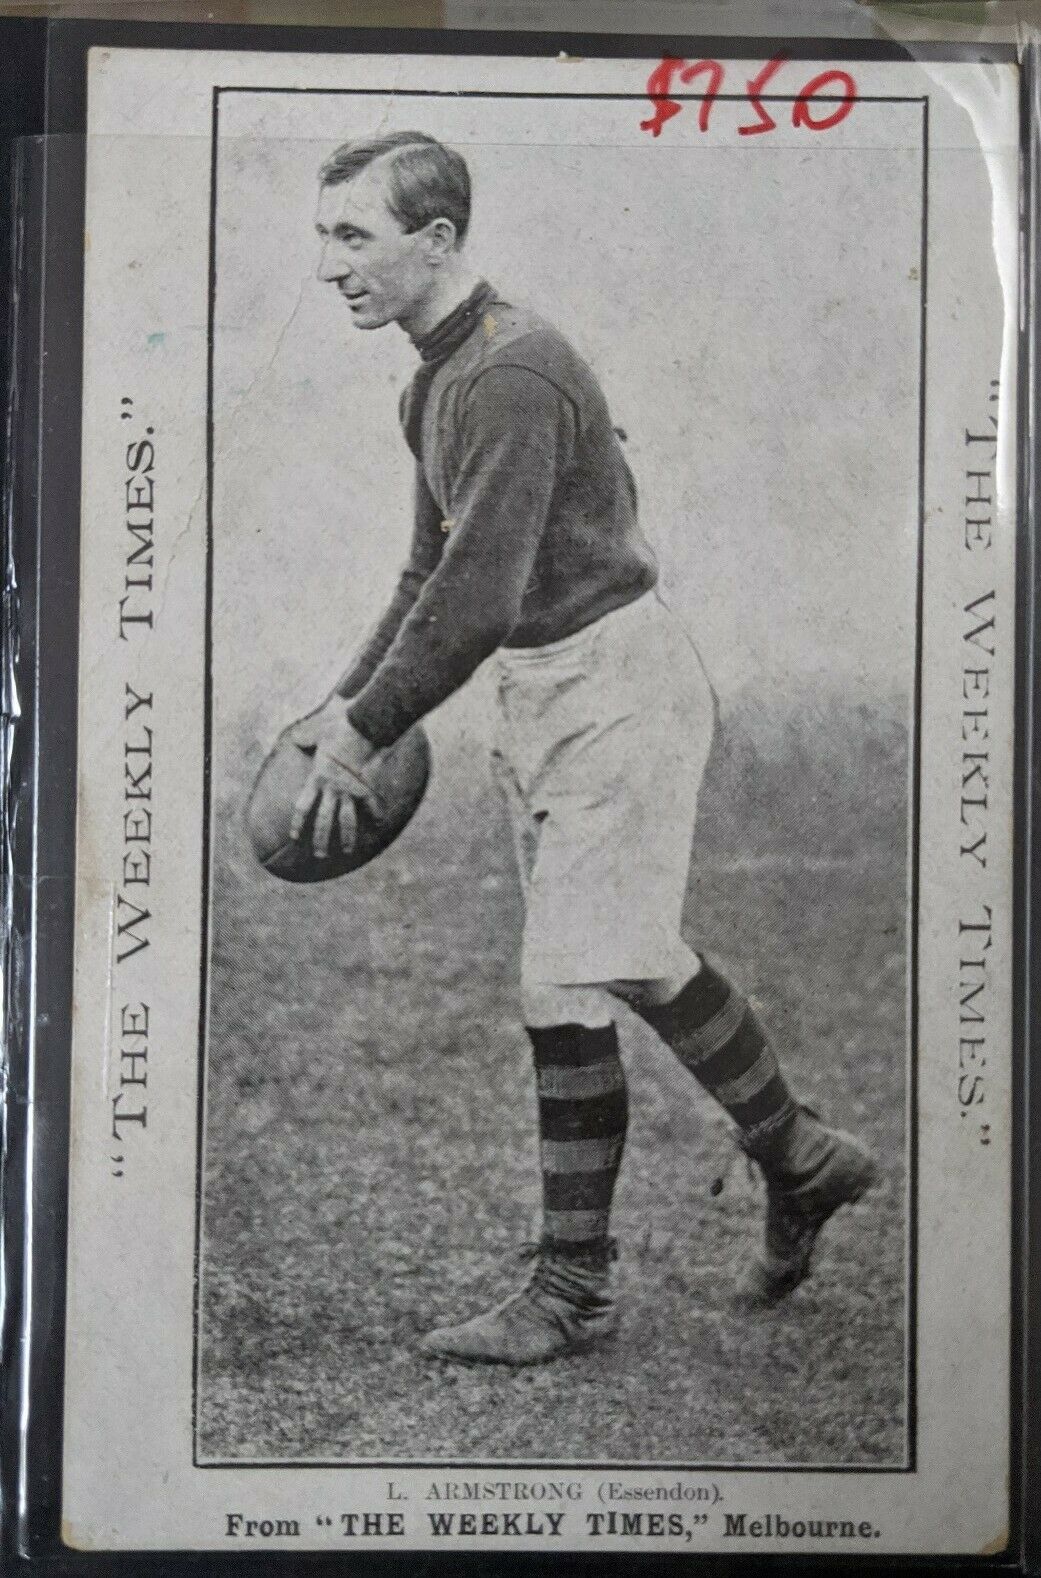 VFL 1910 Football Weekly Times Postcard Essendon L Armstrong